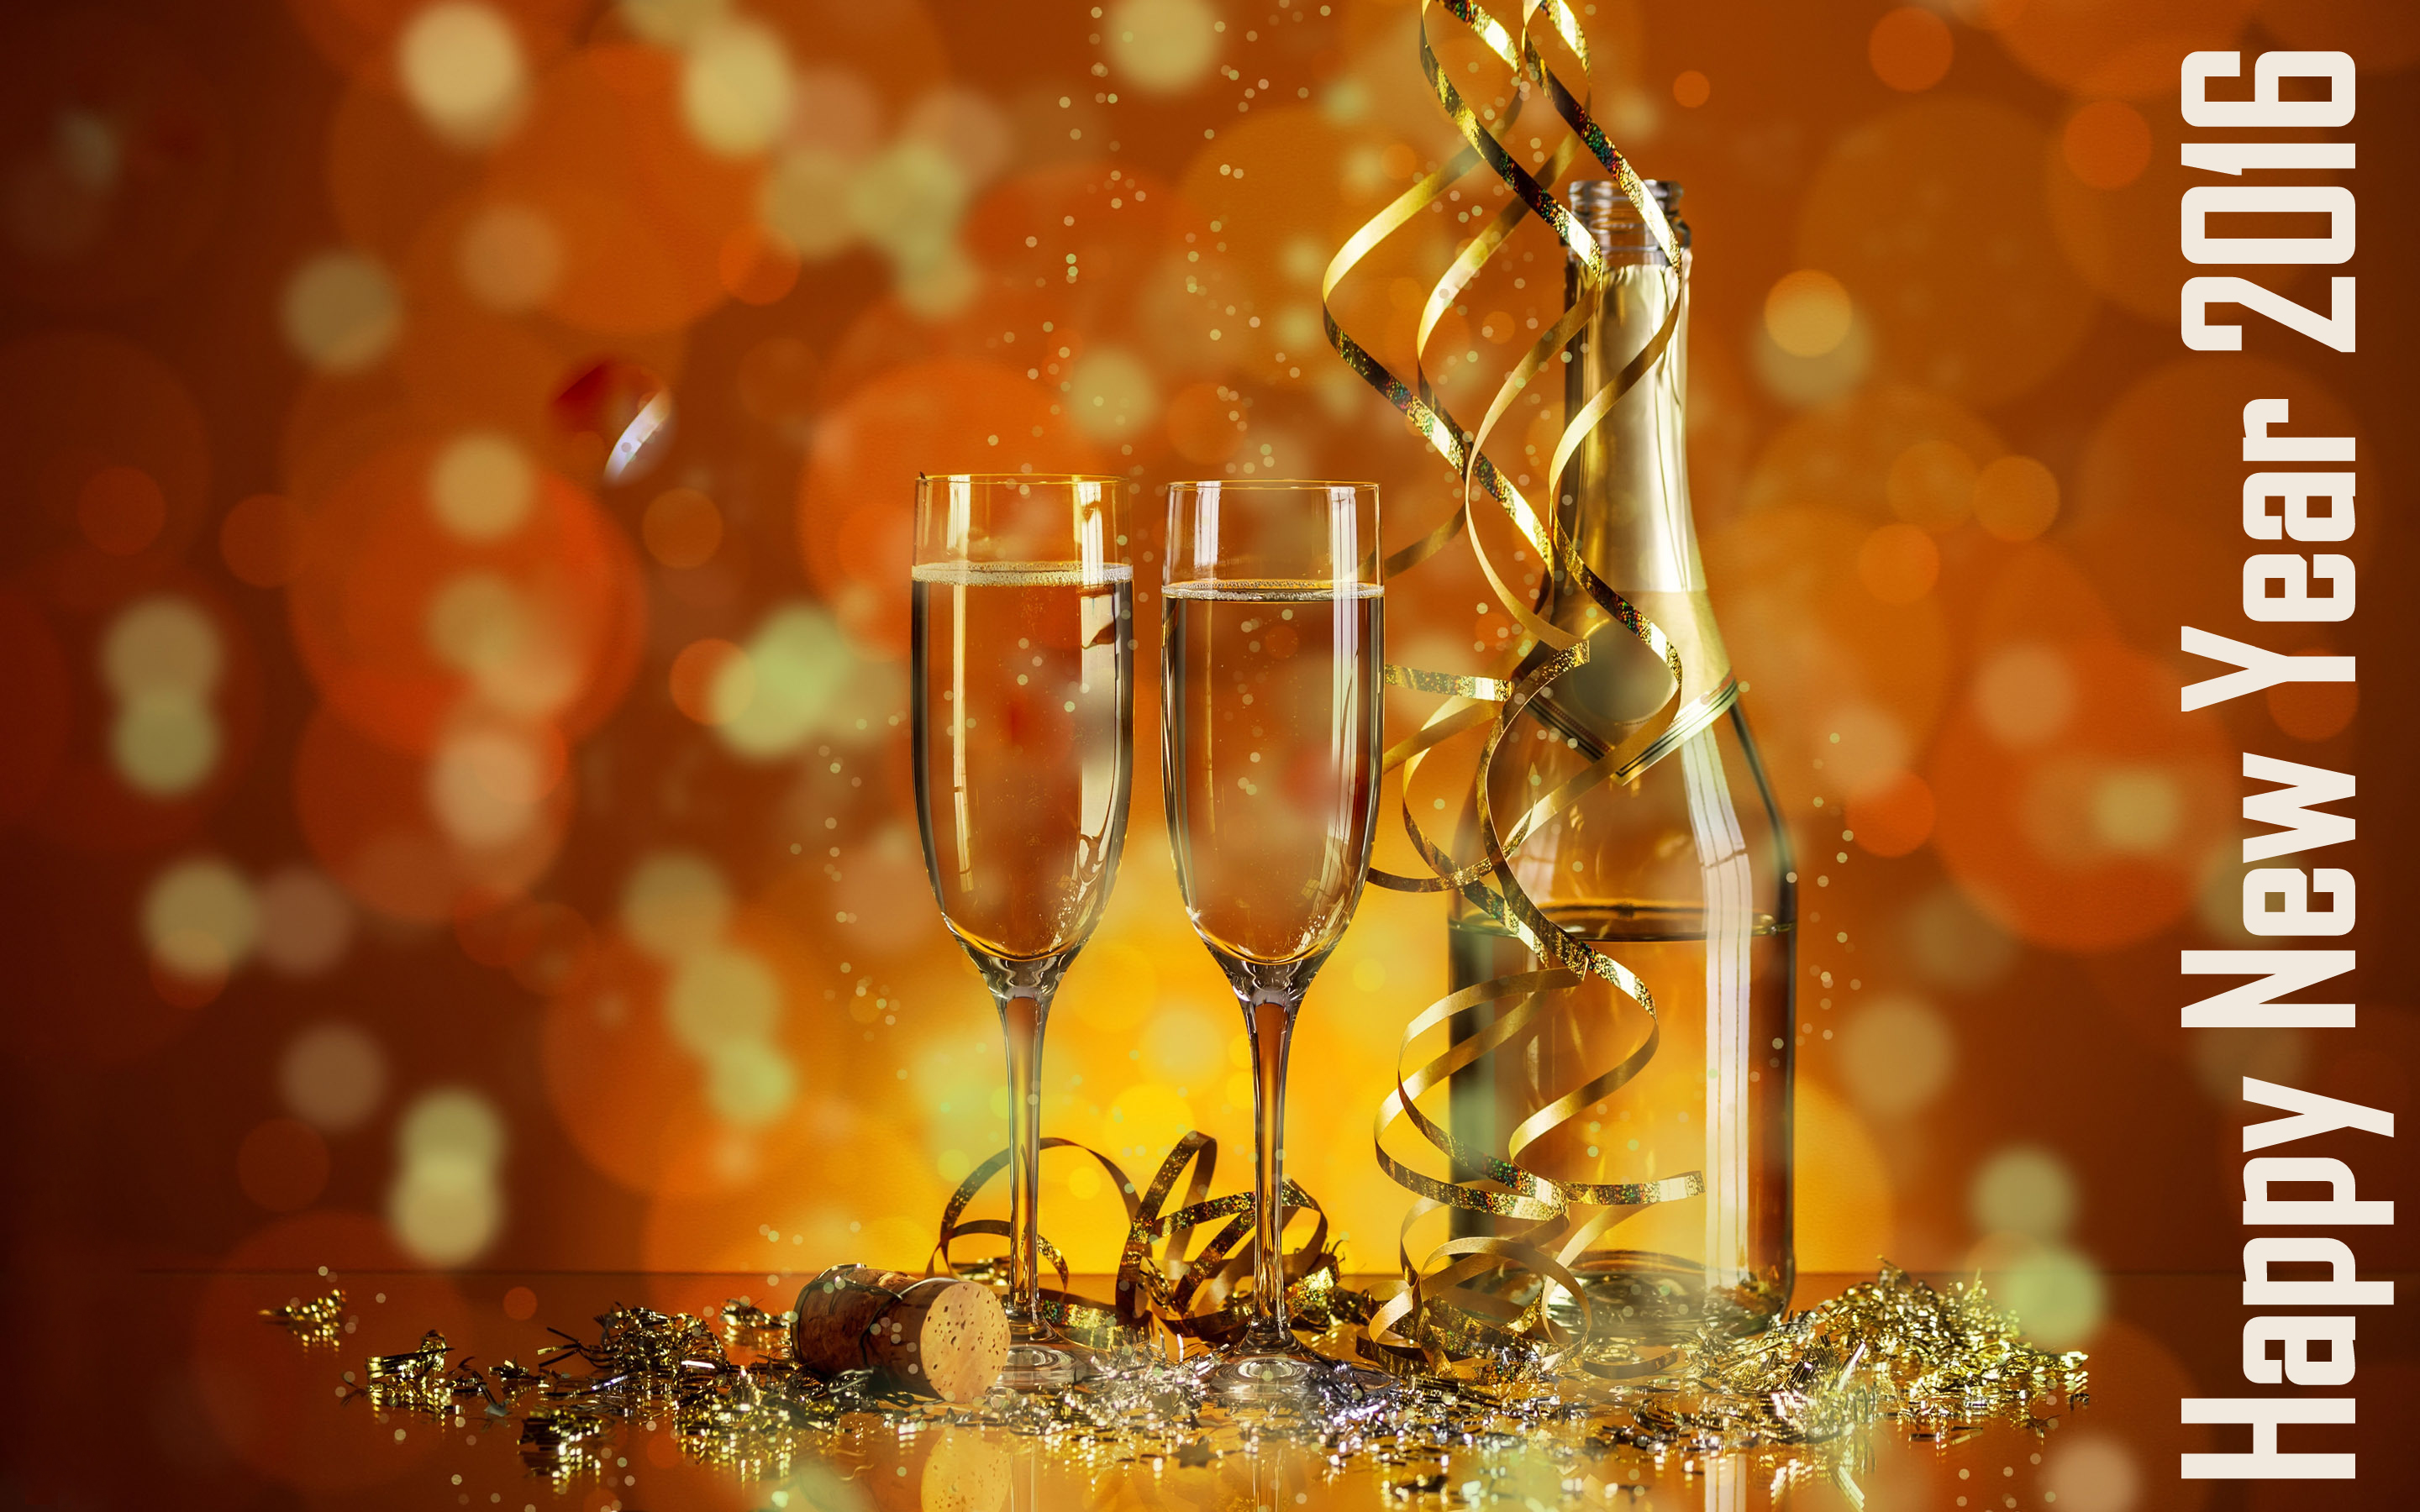 Holiday New Year 2016 HD Wallpaper | Background Image